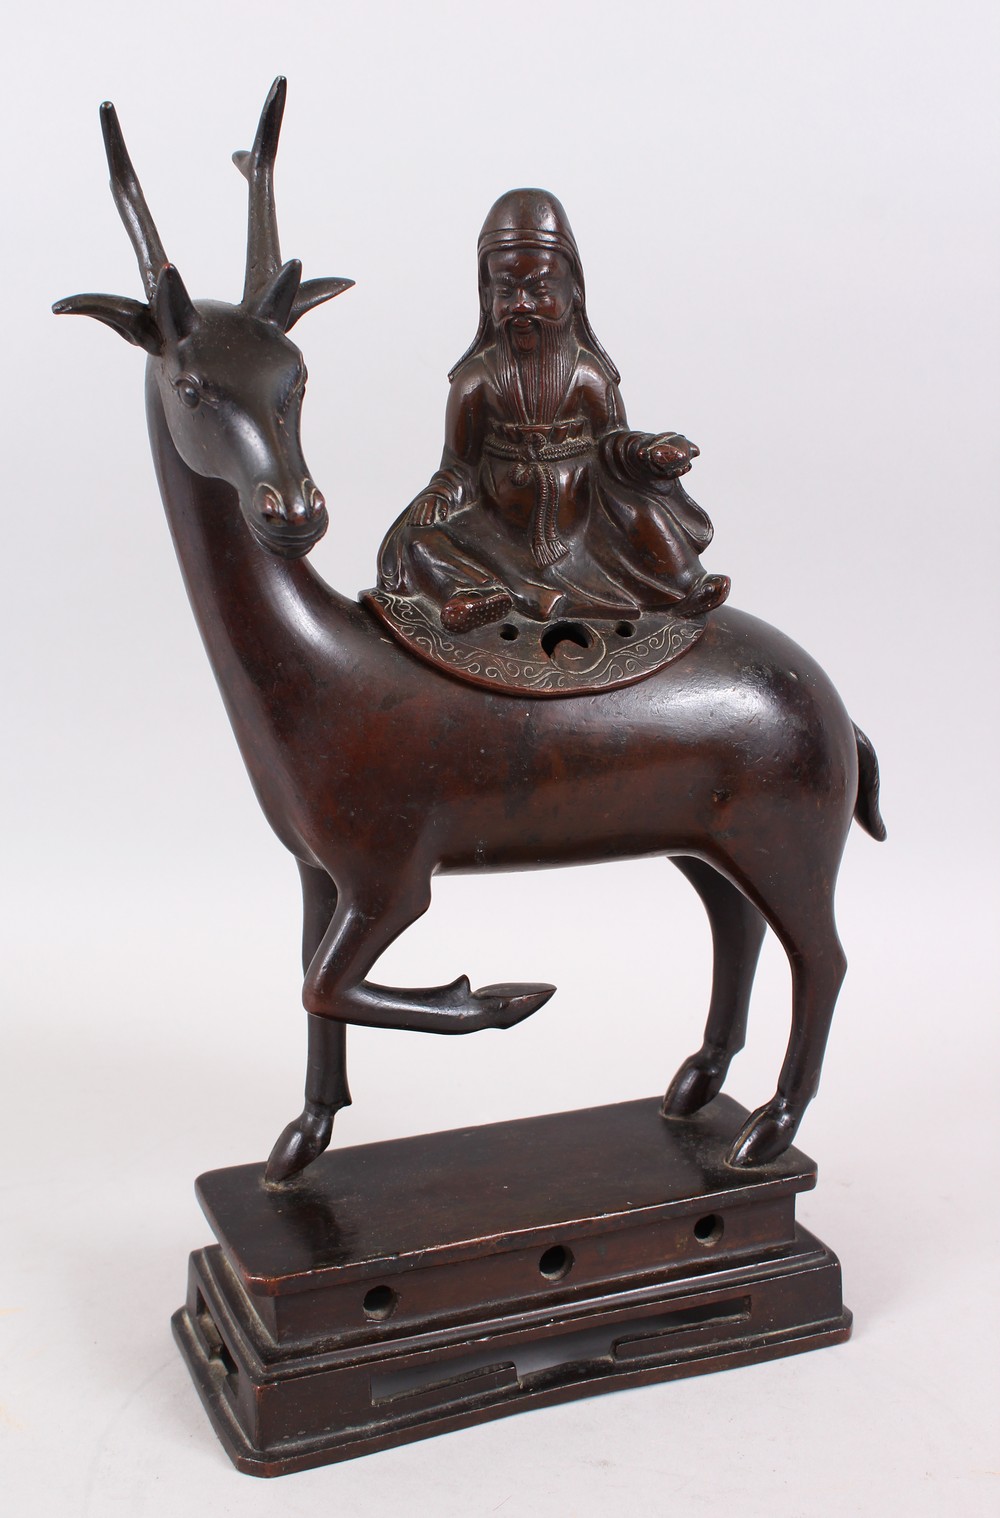 A 19TH CENTURY CHINESE BRONZE CENSER / BURNER OF A DEER, the deer in a gentle pose with one hoof